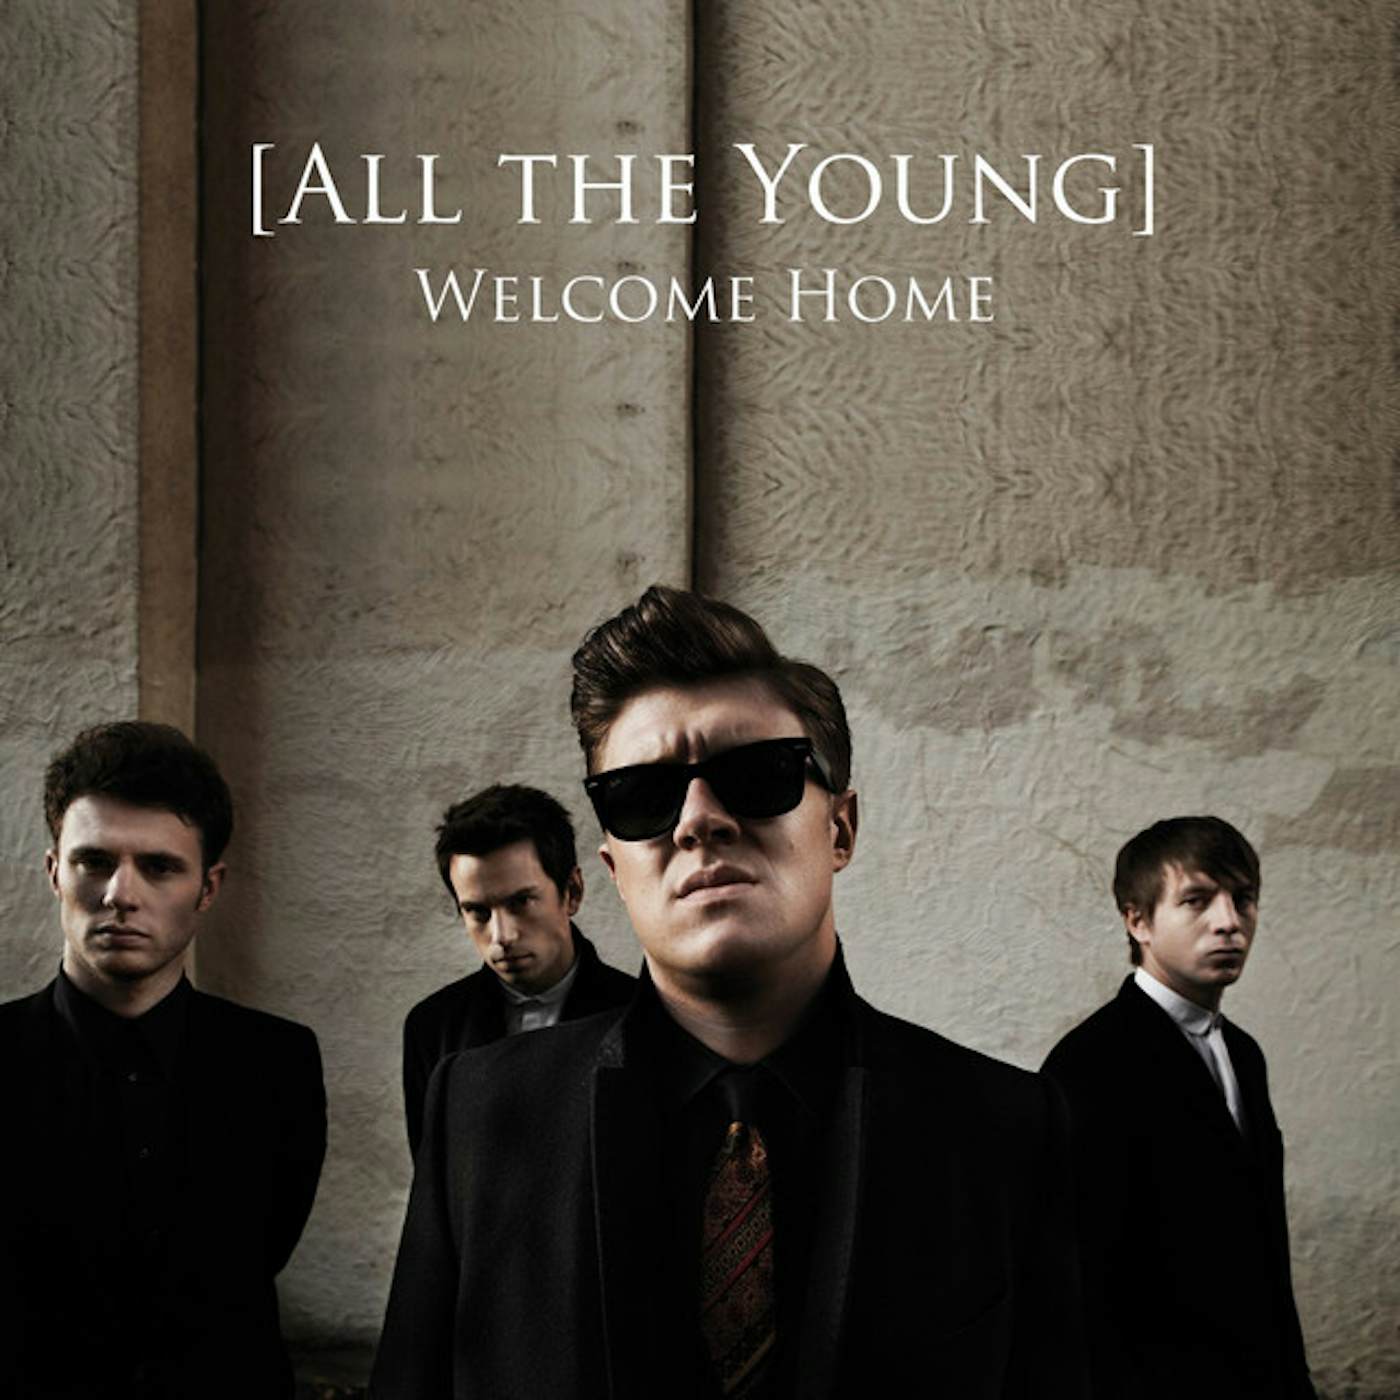 All The Young Welcome Home Vinyl Record